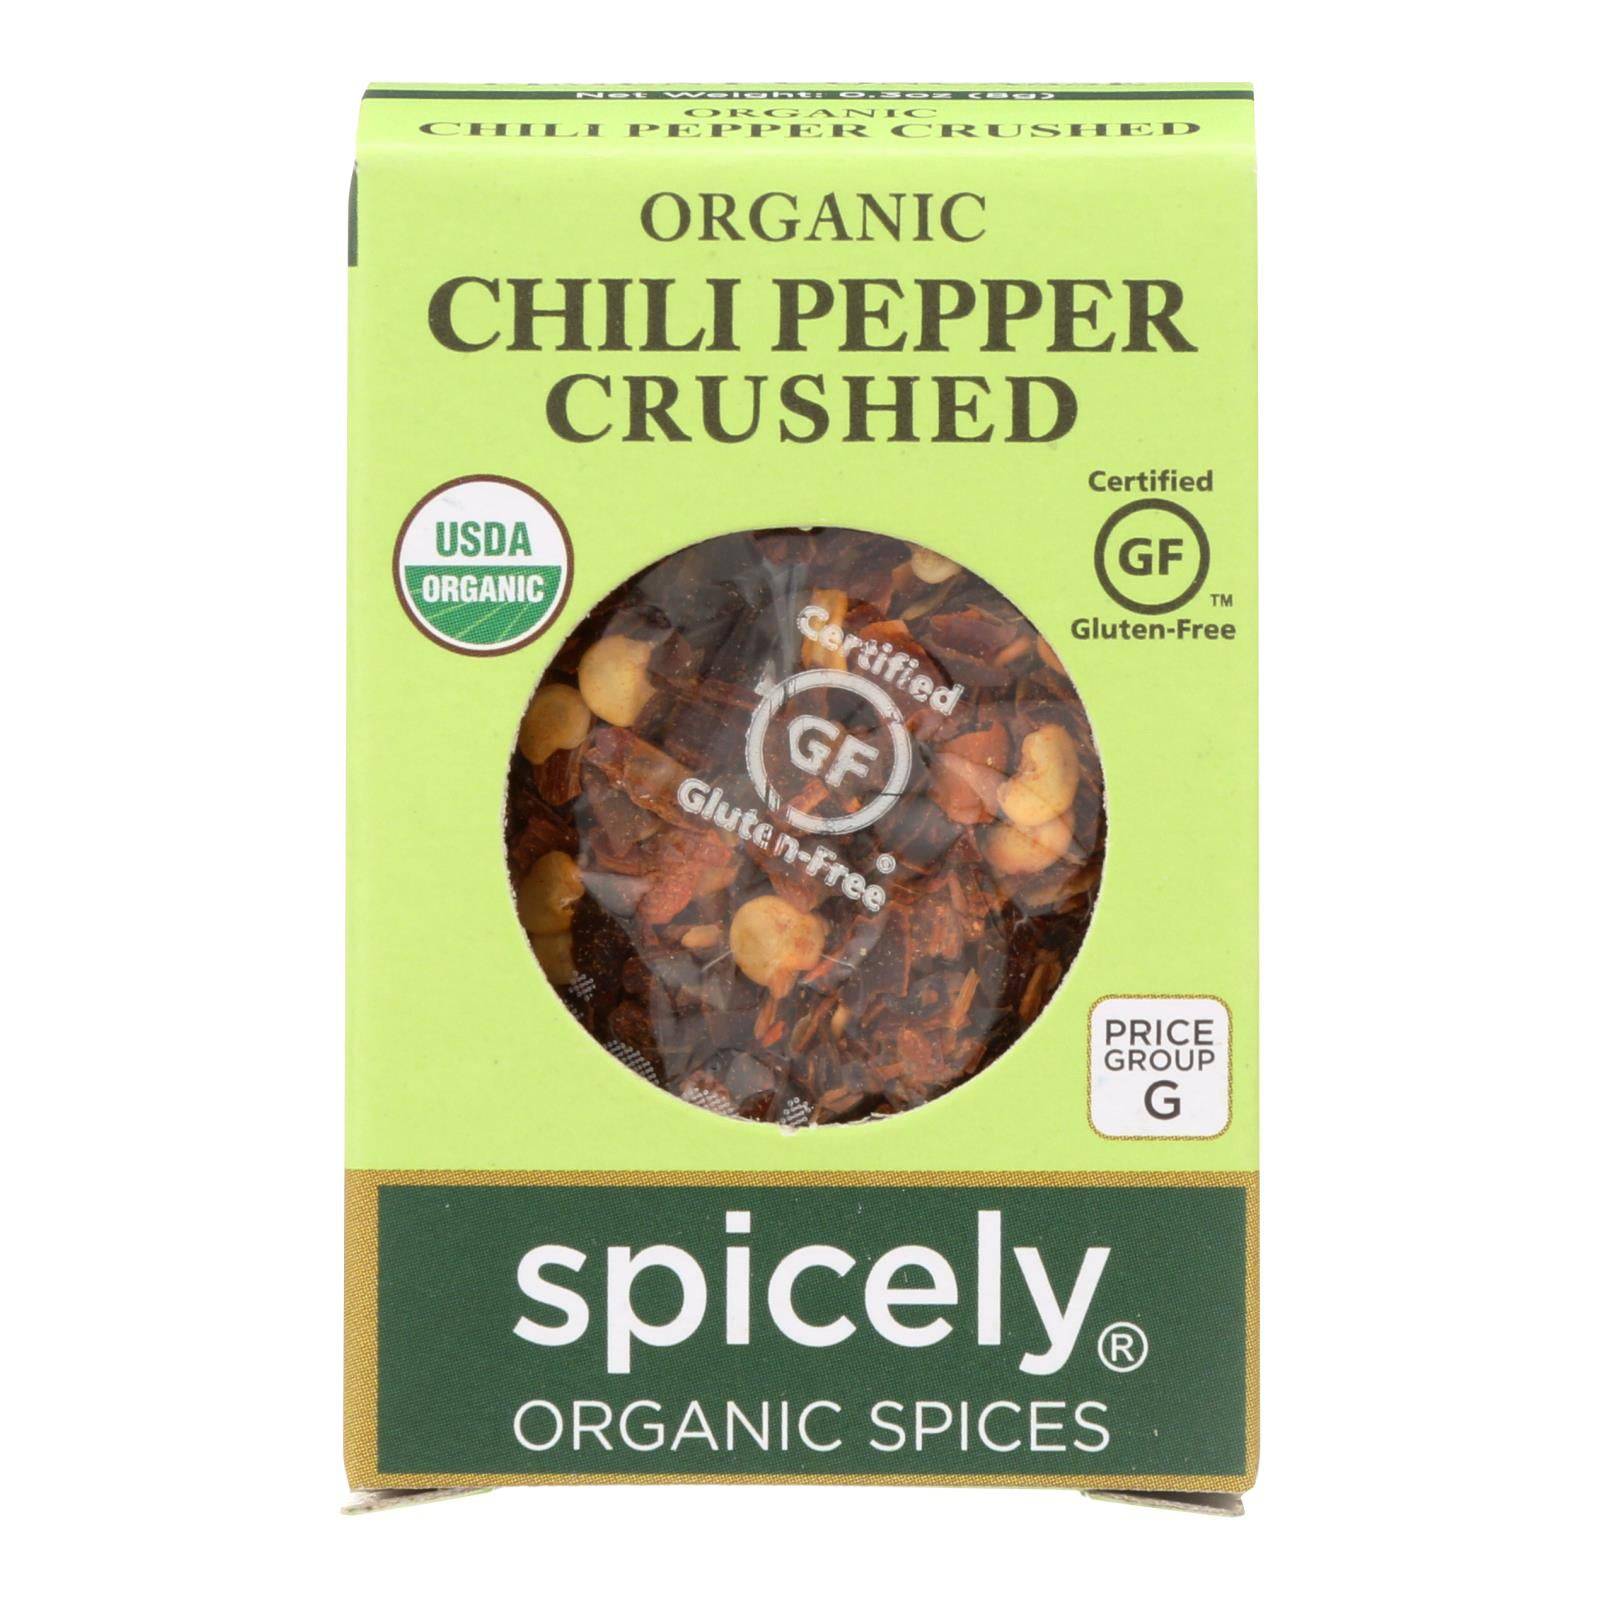 Spicely Organics - Organic Chili Pepper - Crushed - Case Of 6 - 0.3 Oz. | OnlyNaturals.us